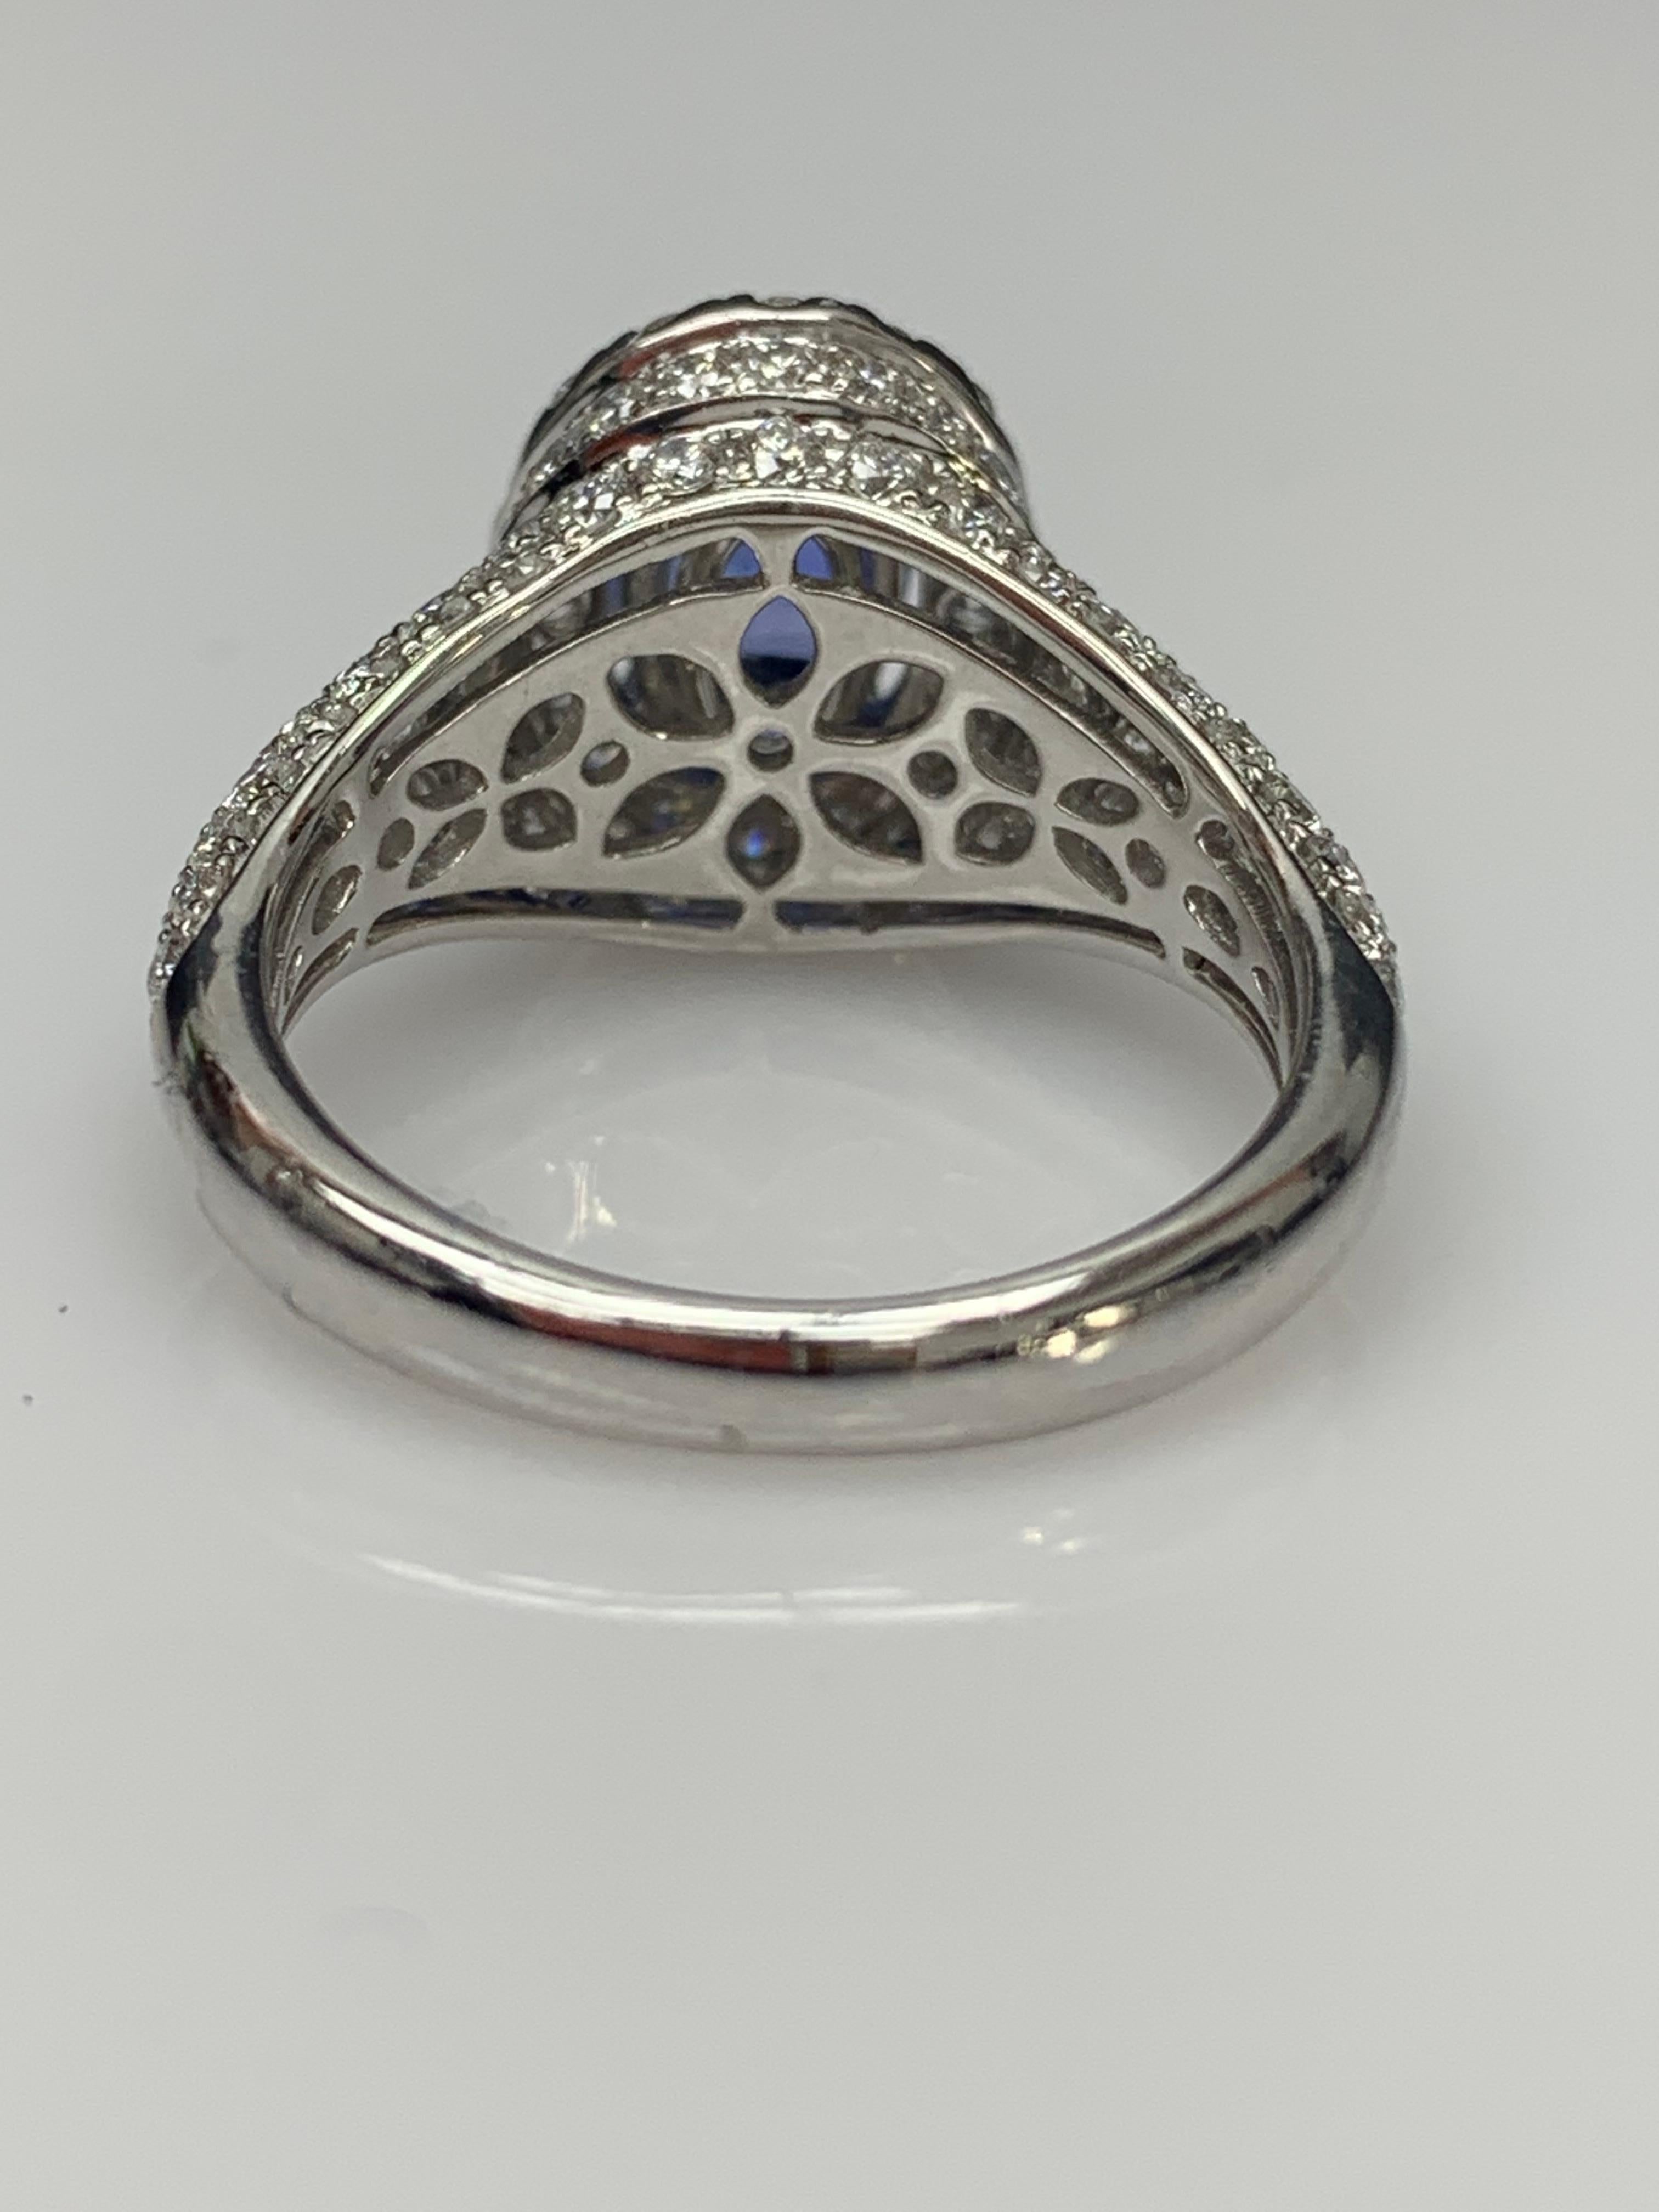 1.27 Carat Oval Cut Blue Sapphire and Diamond Fashion Ring in 18K White Gold For Sale 1